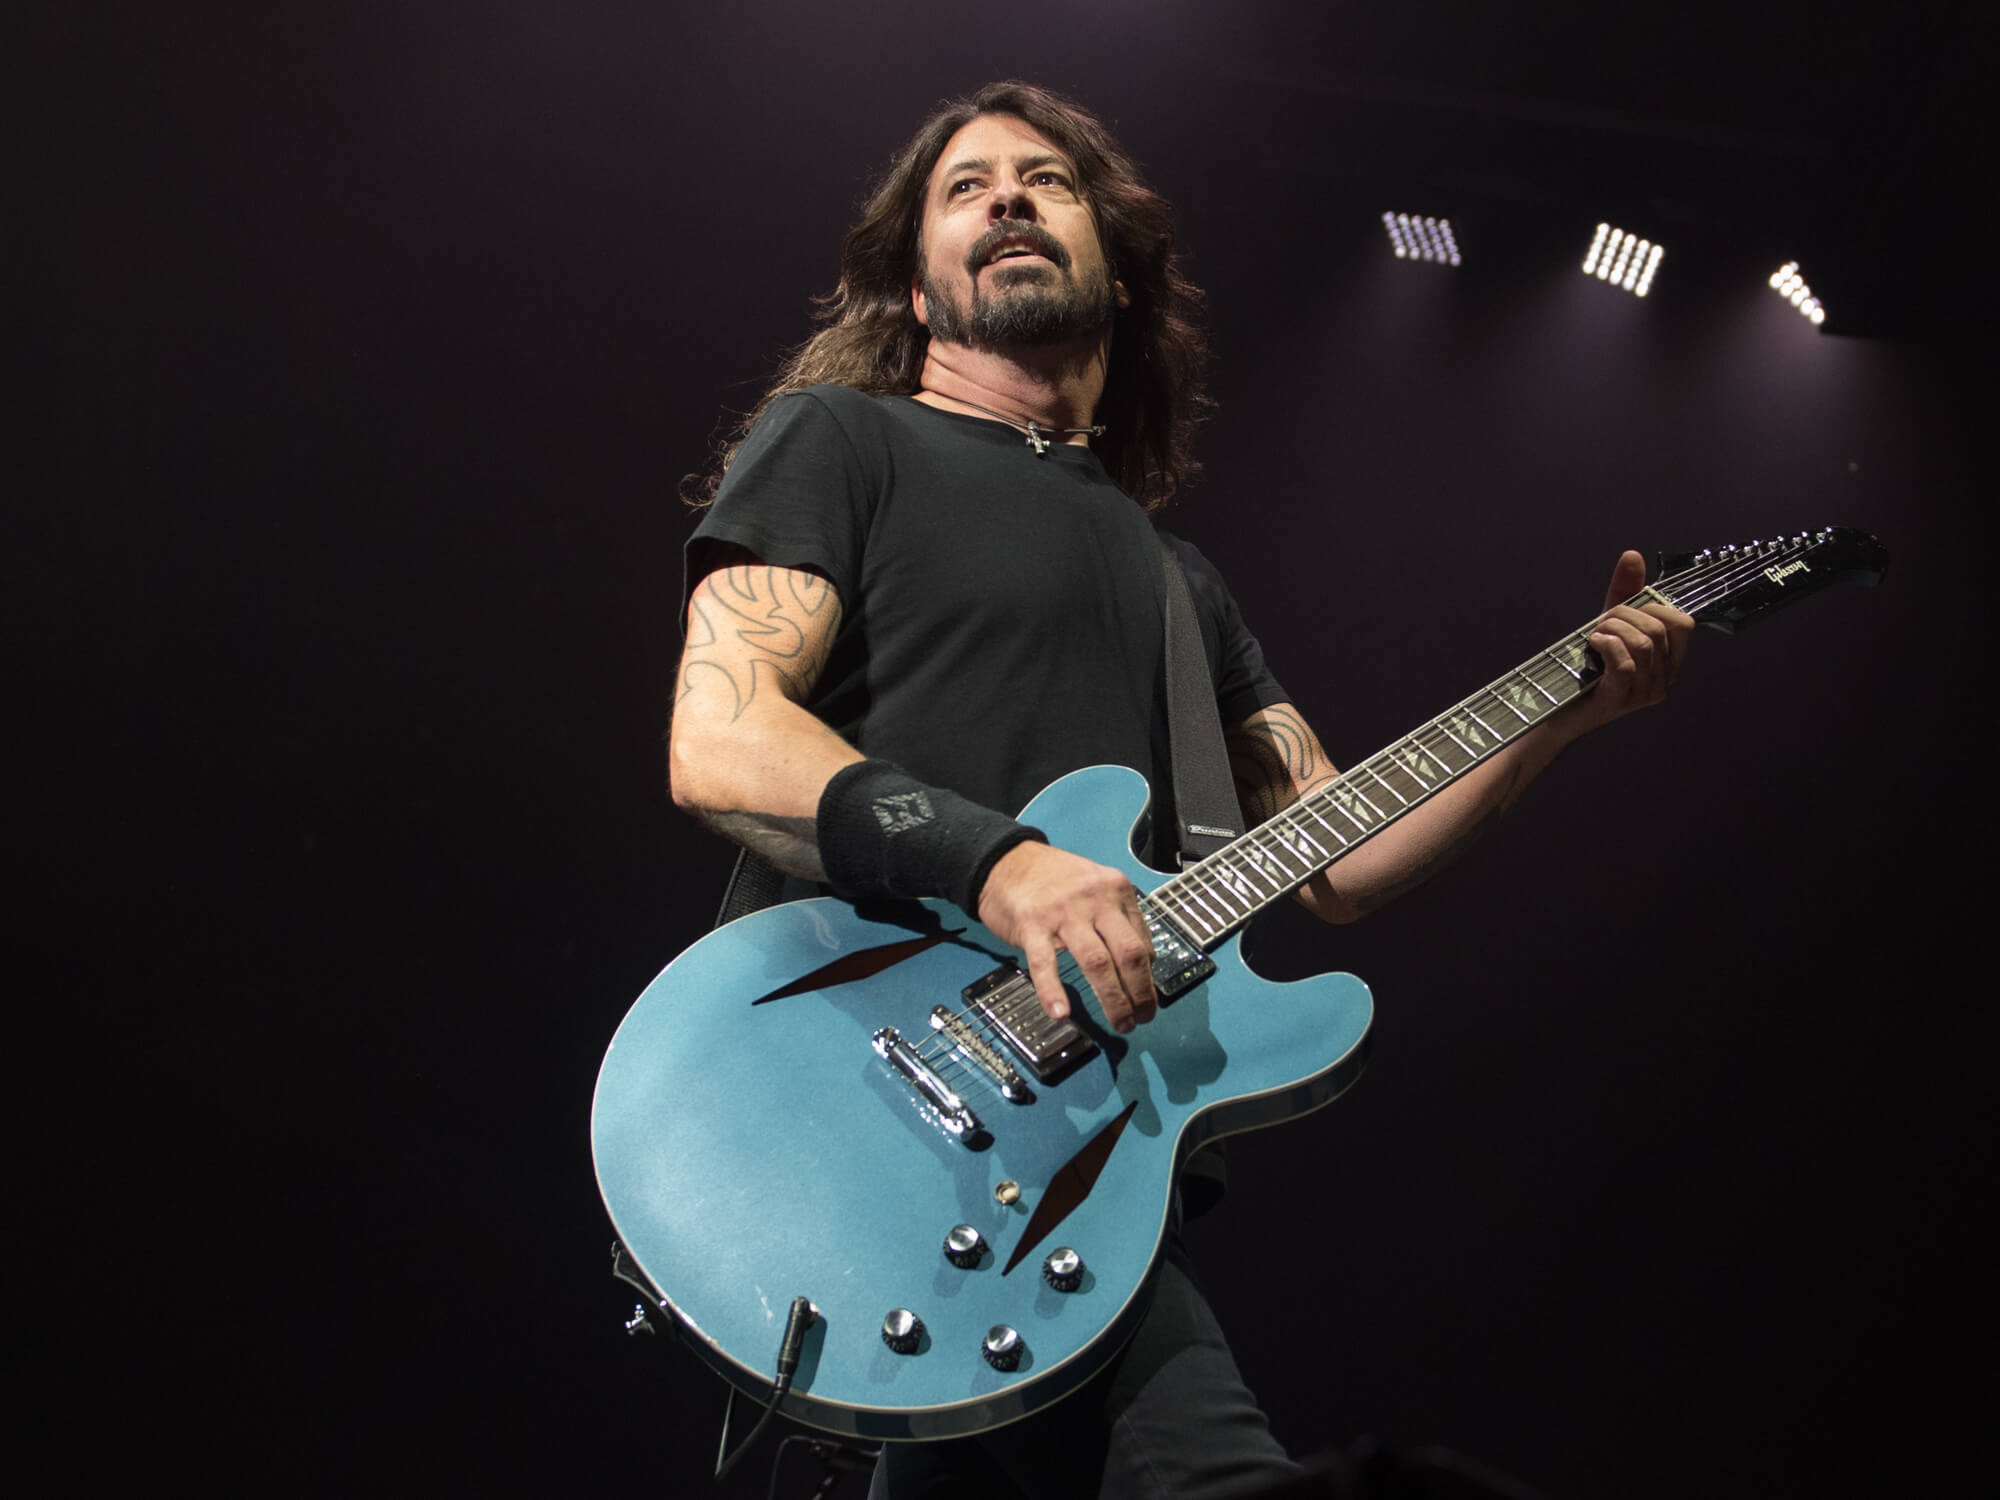 Dave Grohl and his Gibson DG-335 Signature Guitar